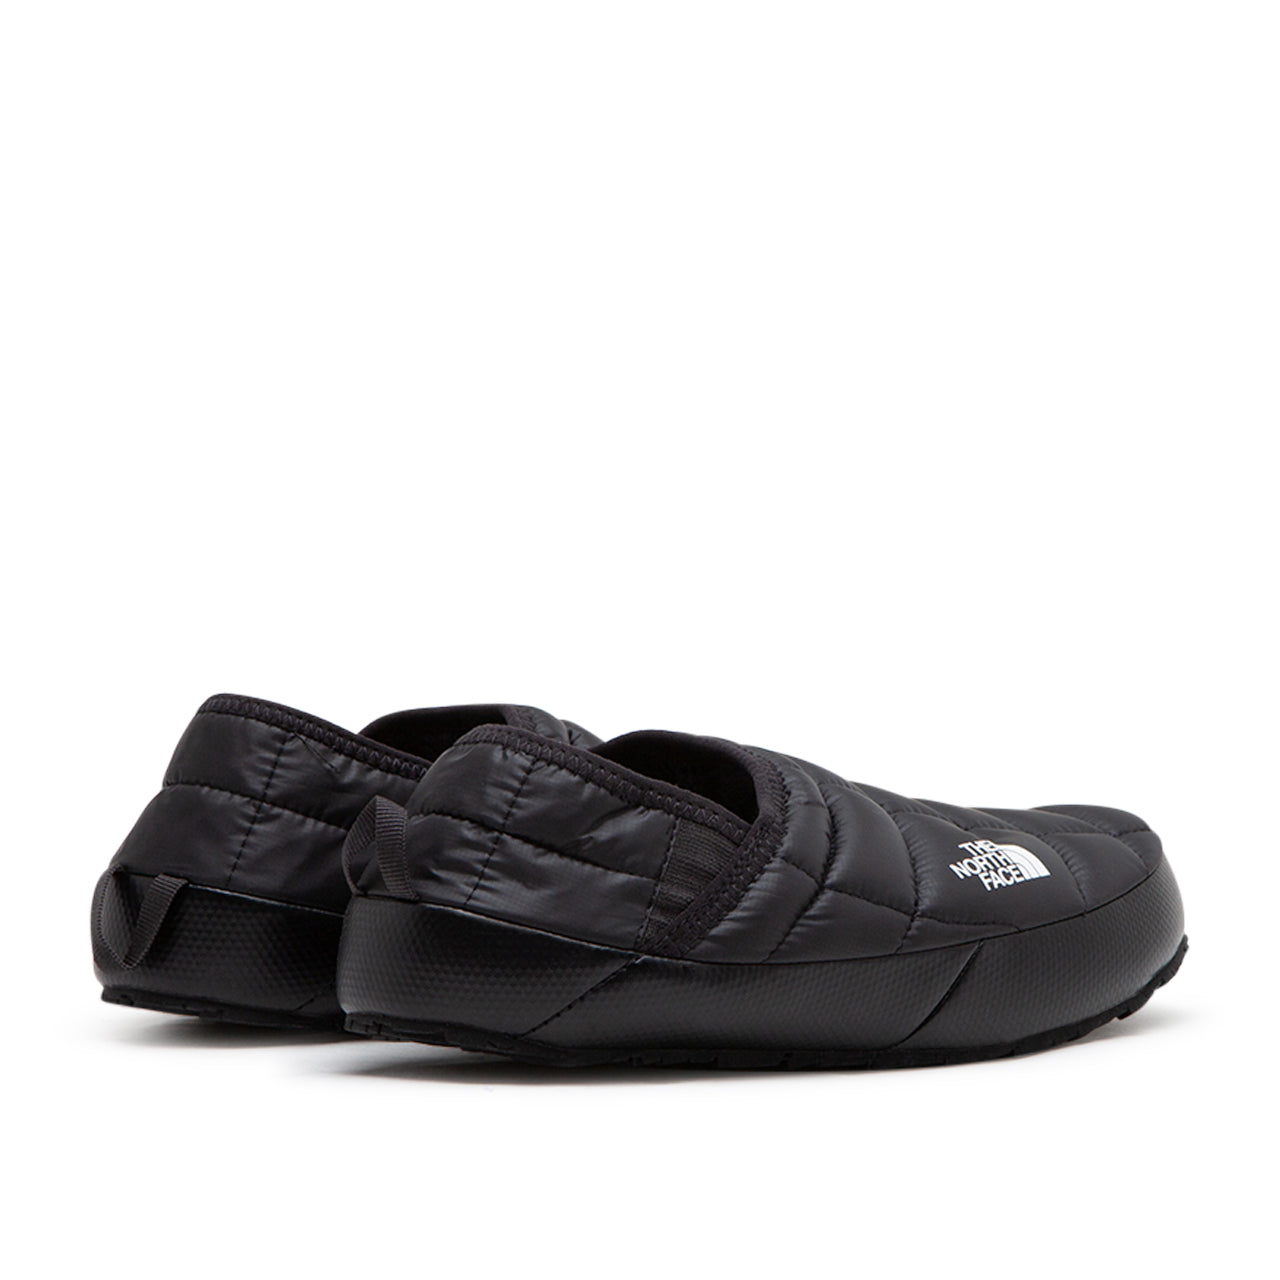 incl. VAT, excl Thermoball V Traction Winter Mules (Schwarz)  - Cheap Juzsports Jordan Outlet